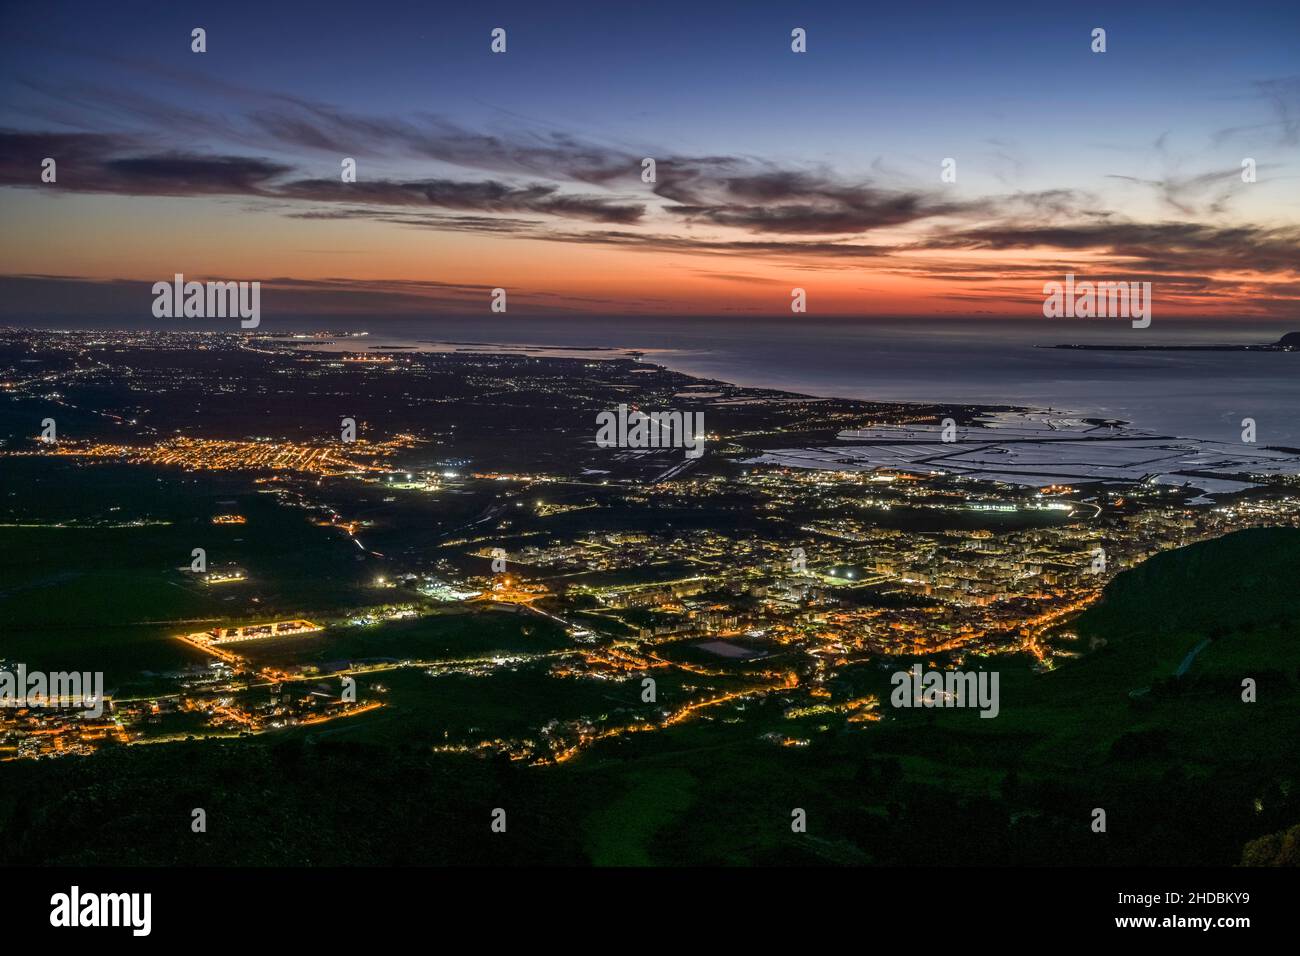 Panorama-Ansicht von Trapani, Sizilien, Italien Banque D'Images